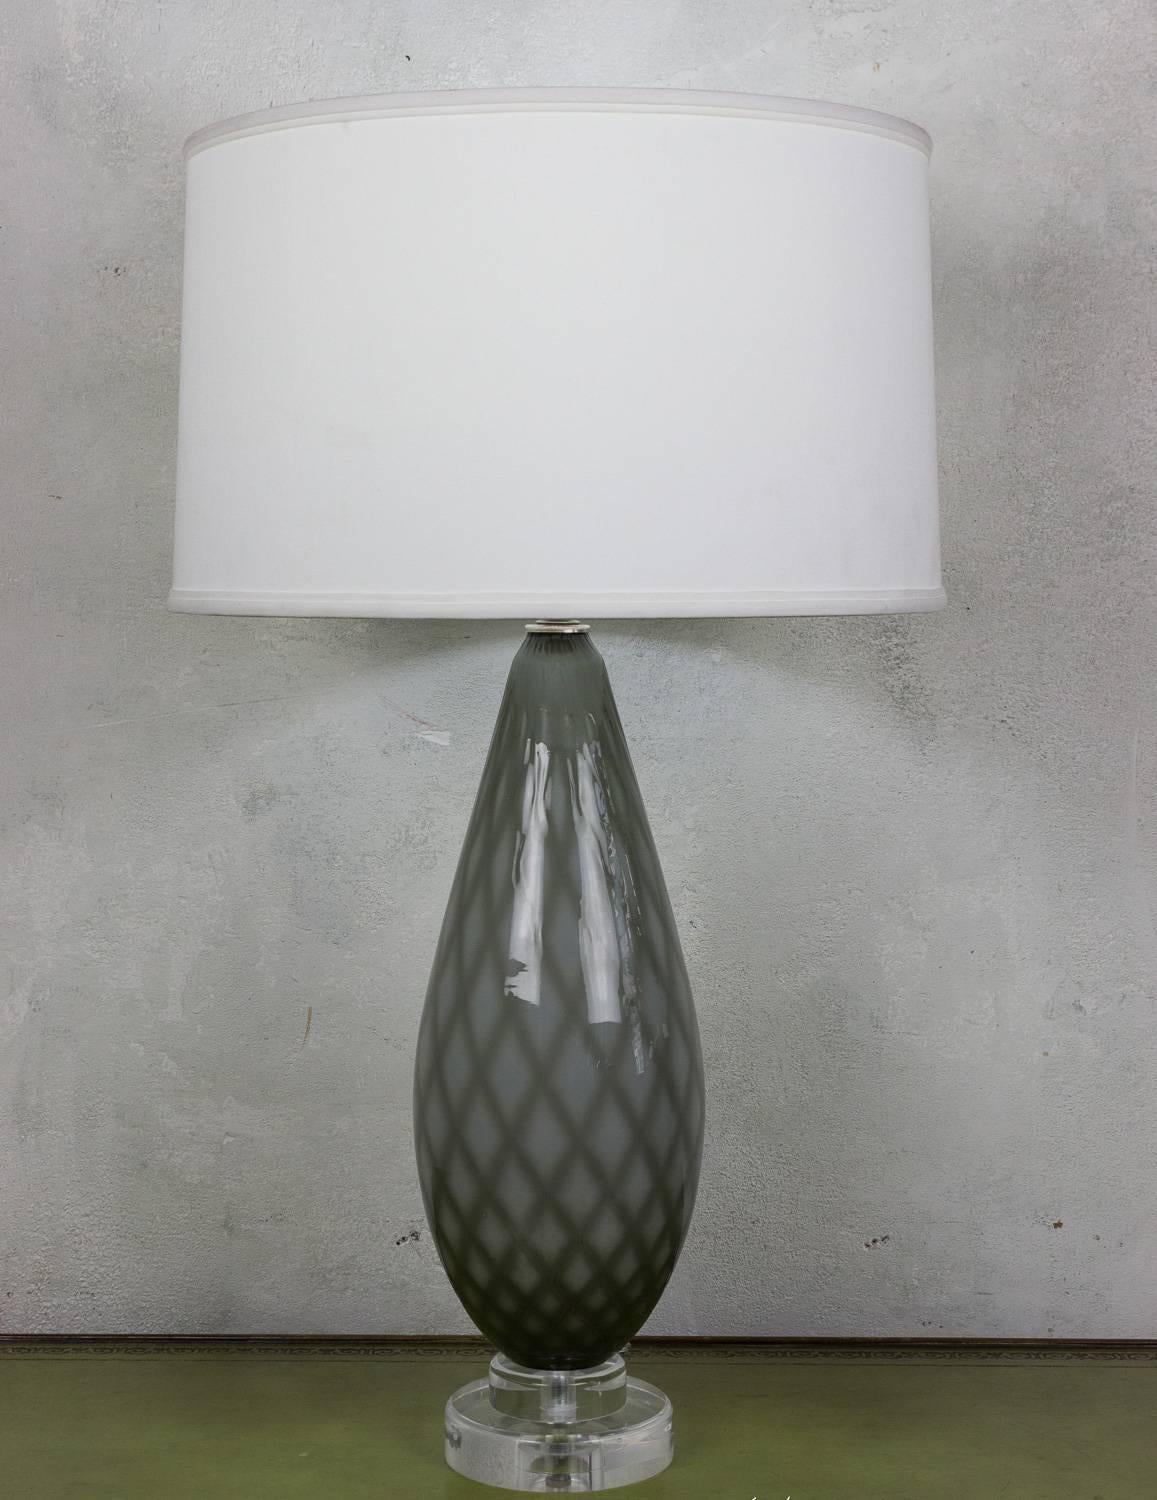 This captivating pair of table lamps originates from Italy, dating back to the 1950s. The lamps feature a remarkable diamond pattern in a cased glass design, incorporating hues of greyish-green and white. This combination brings a touch of classic